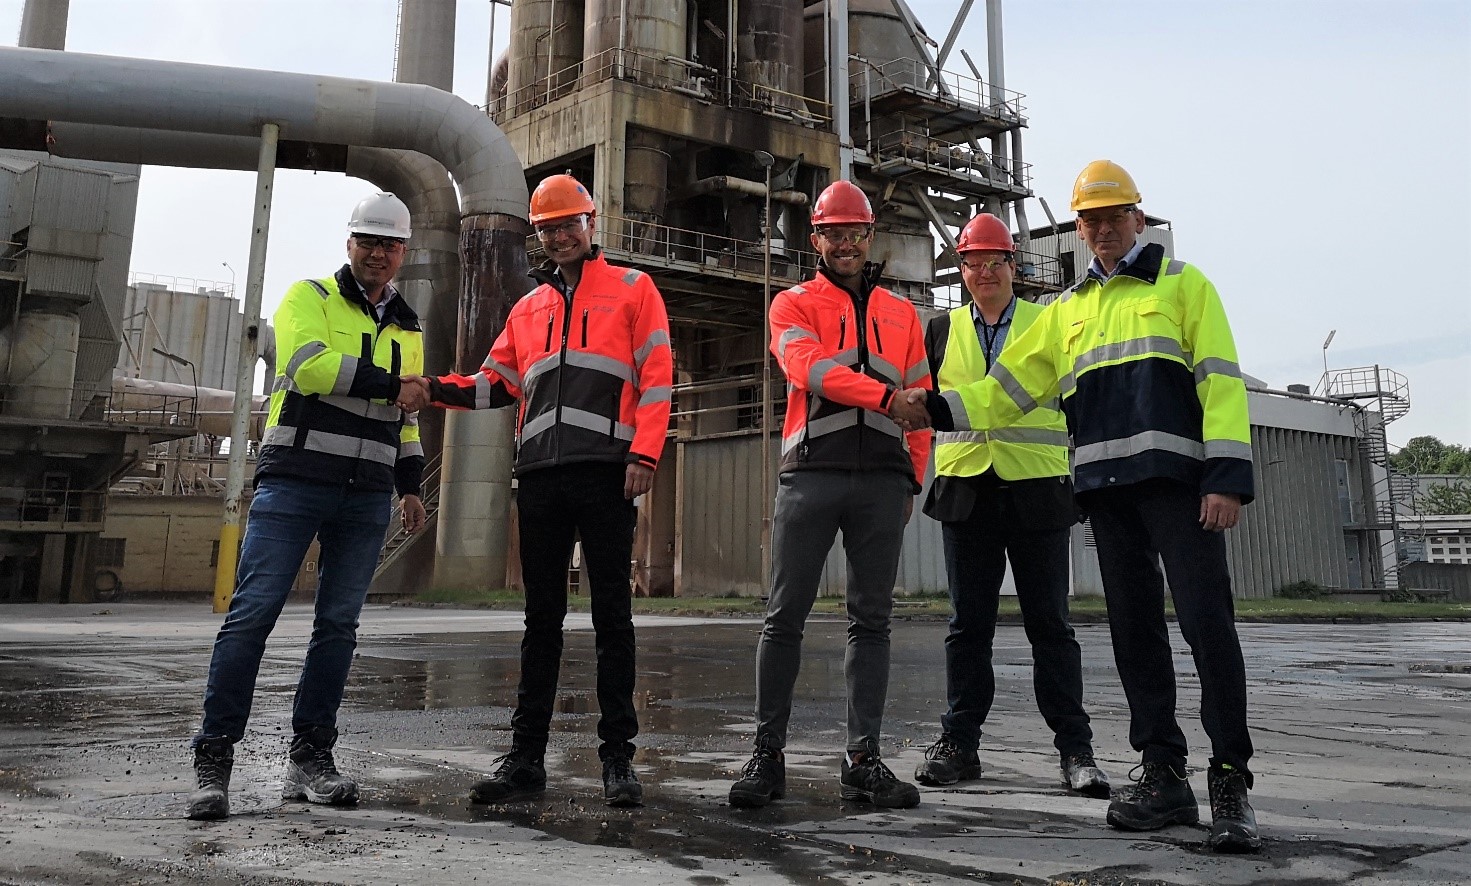 After thorough hand cleaning, handshakes on the new agreement were given between Aalborg Portland and Aalborg Forsyning.